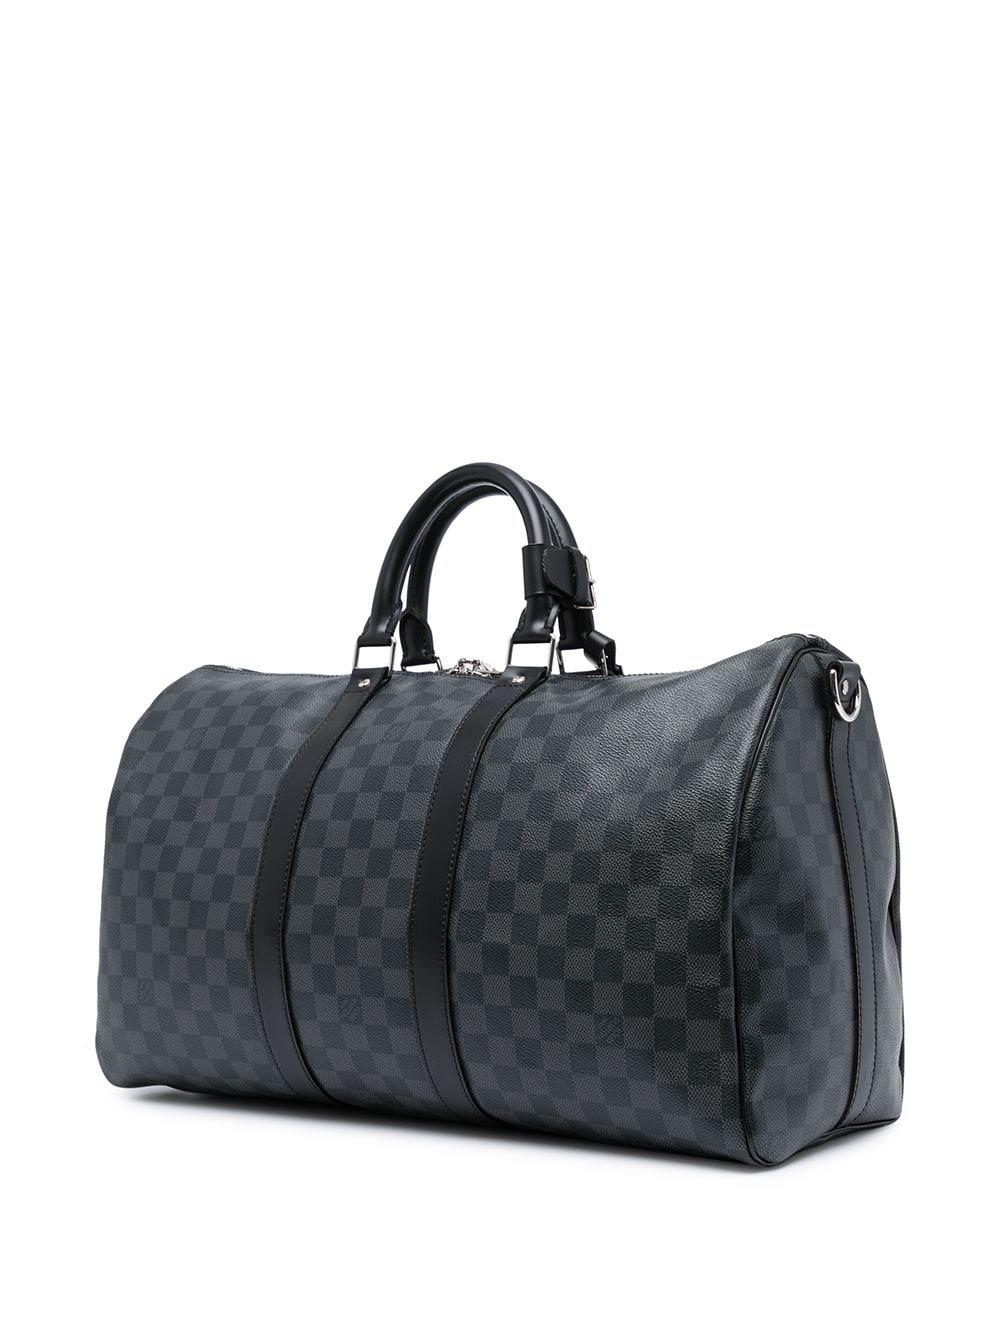 Louis Vuitton Keepall Bandouliere 45 In Excellent Condition In London, GB